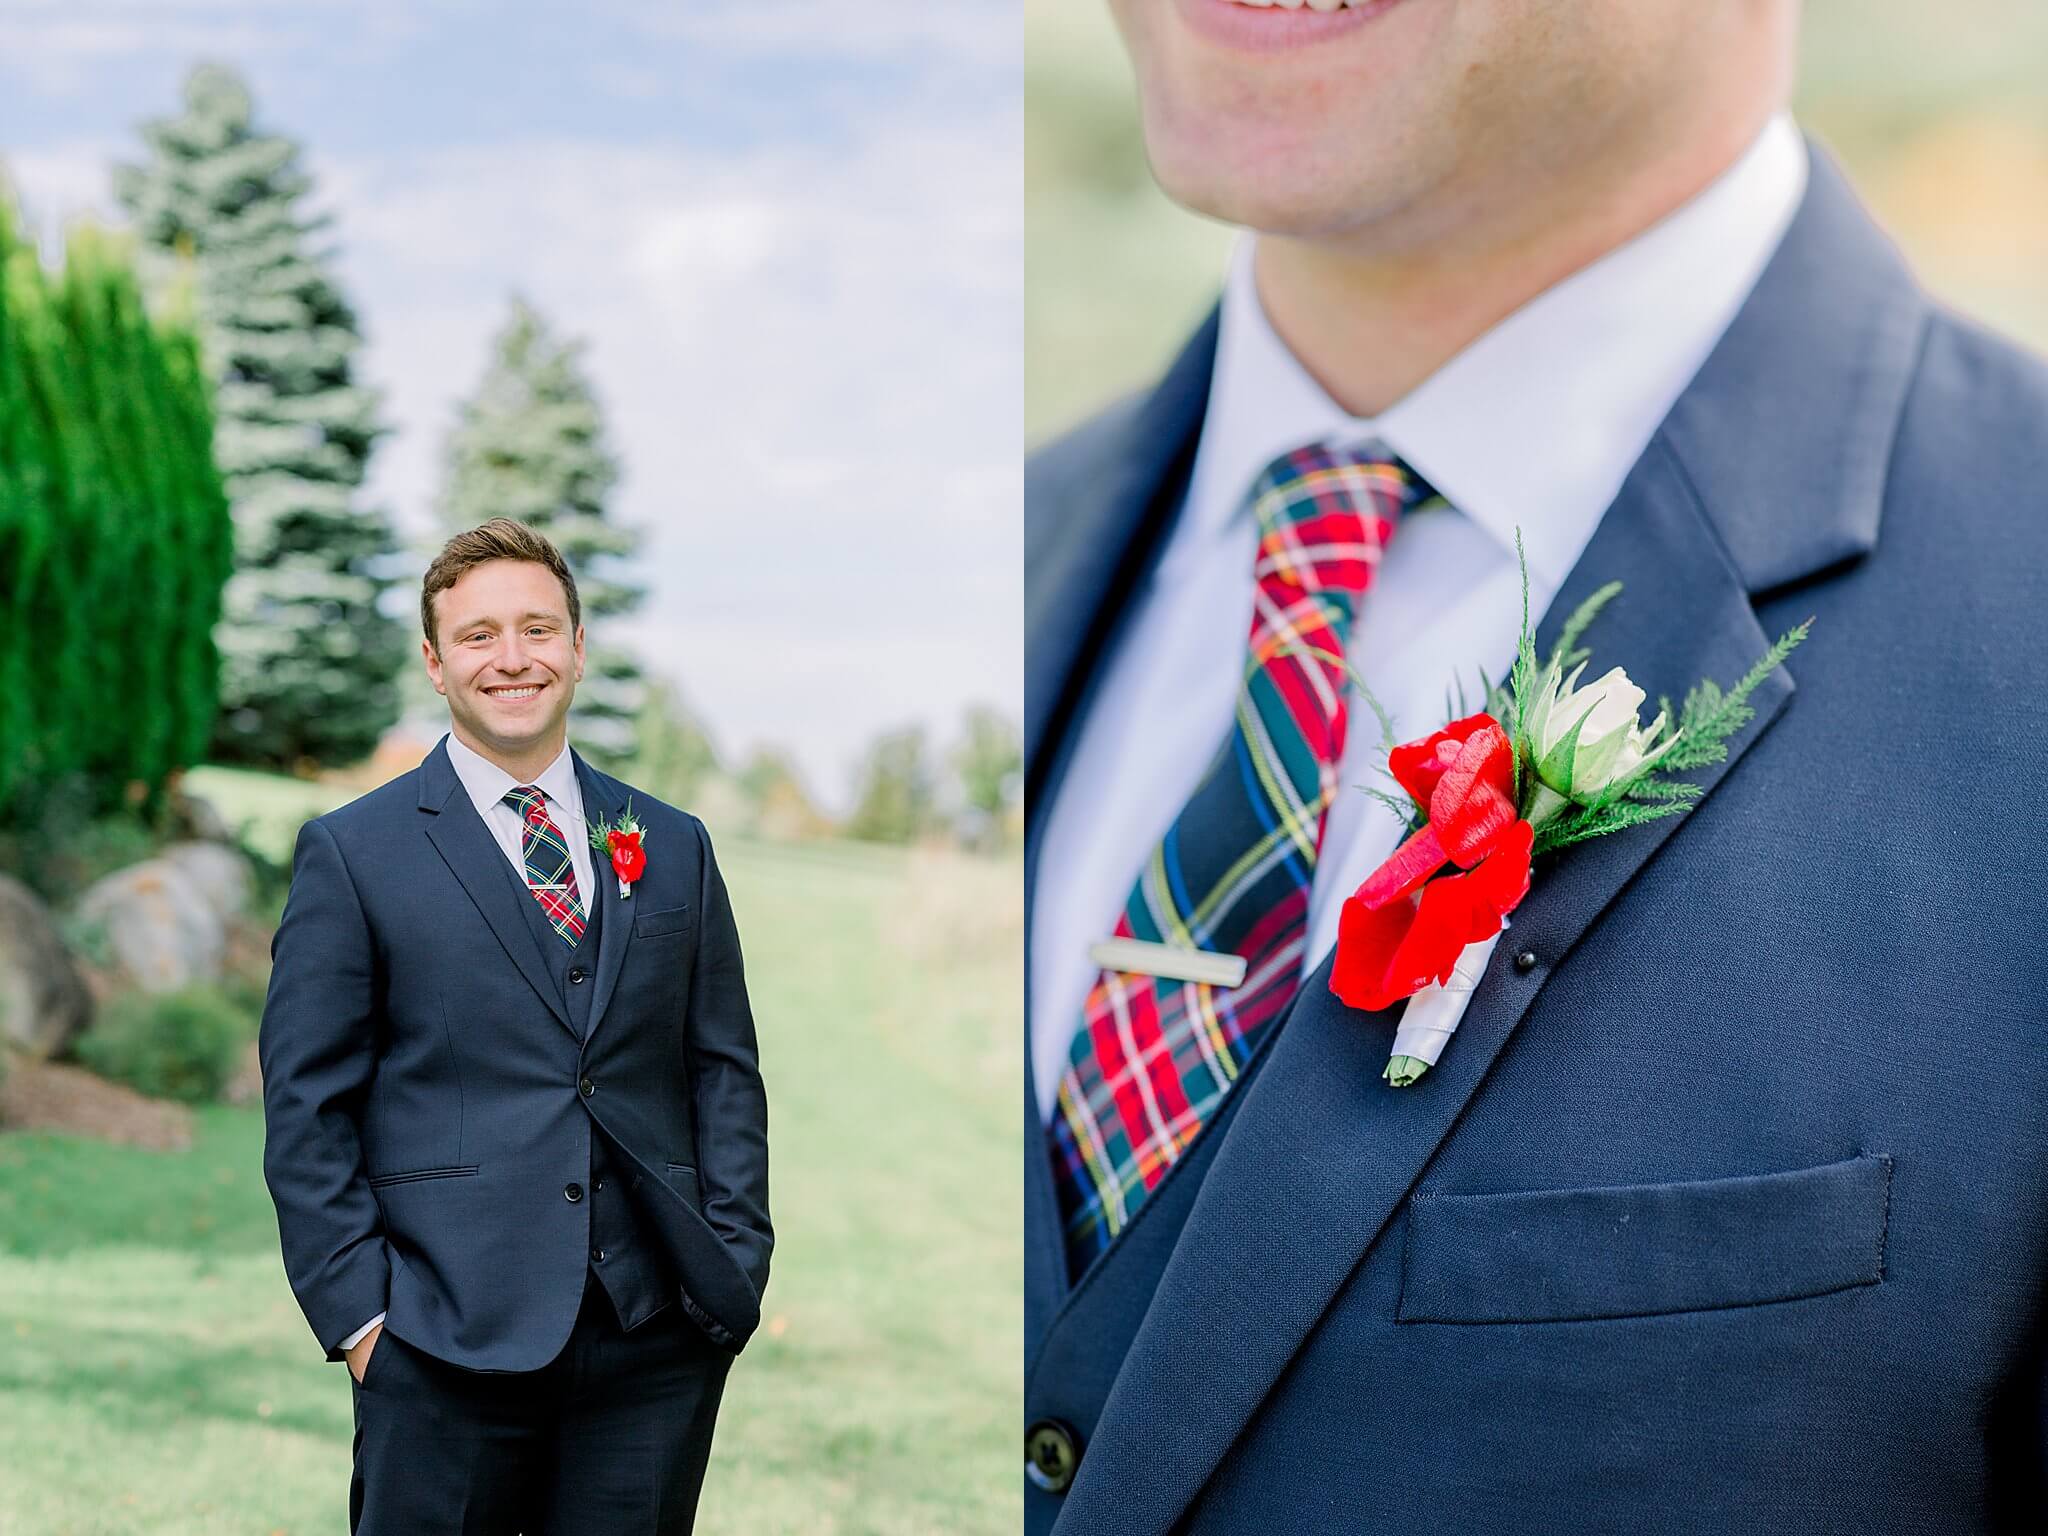 Groom portraits during Timberlee Hills Wedding in Traverse City, Northern Michigan.